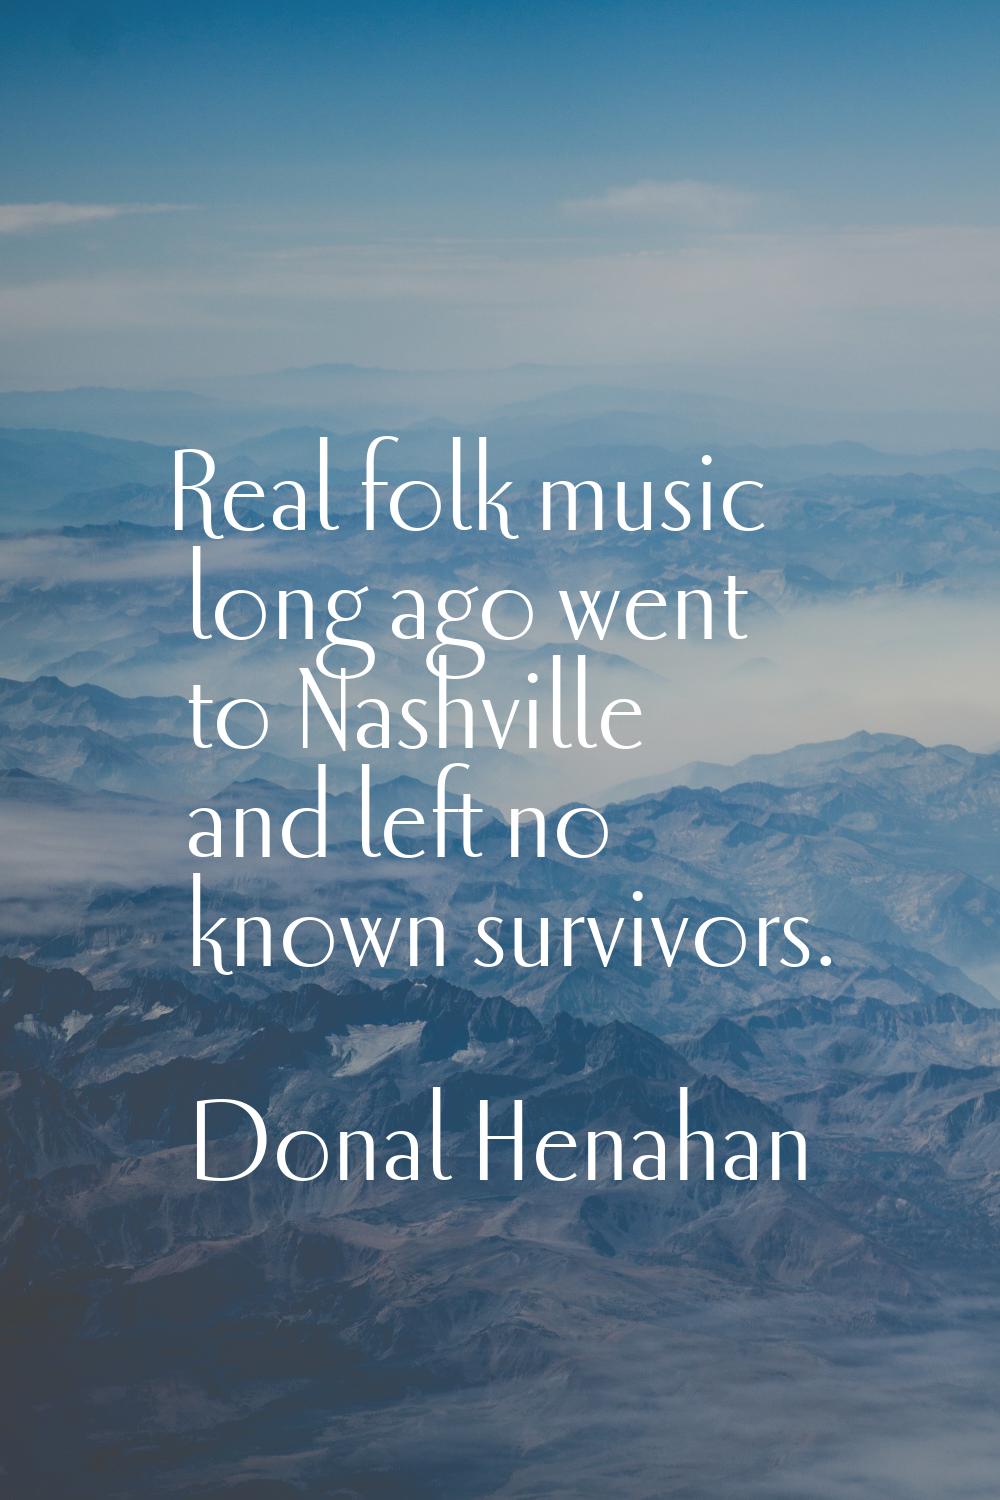 Real folk music long ago went to Nashville and left no known survivors.